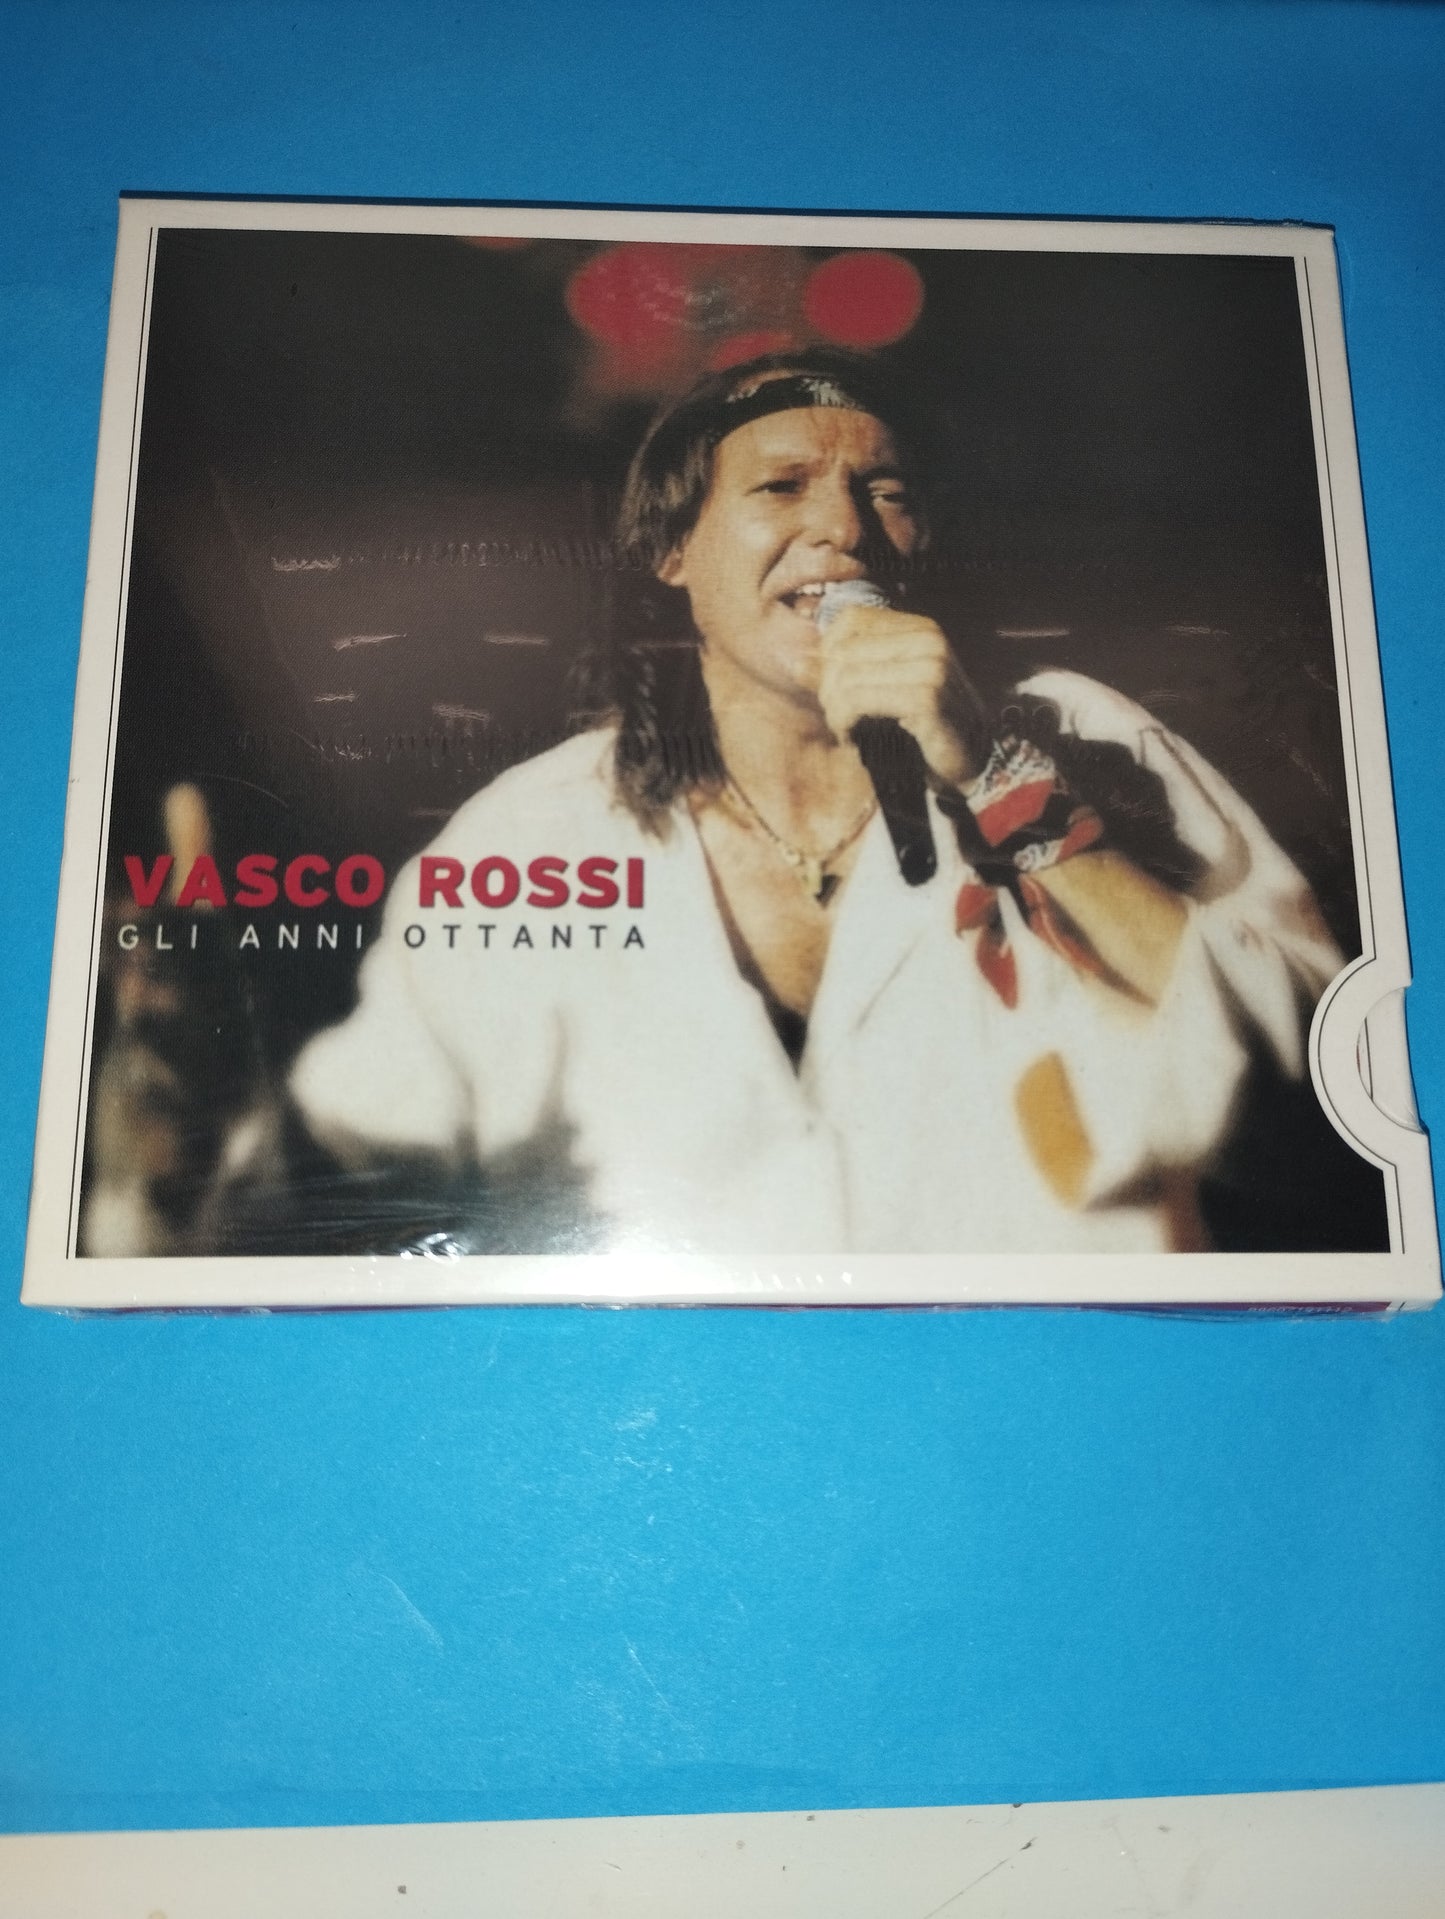 Vasco Rossi The 80s" CD
 Published in 2007 by Sony BMG